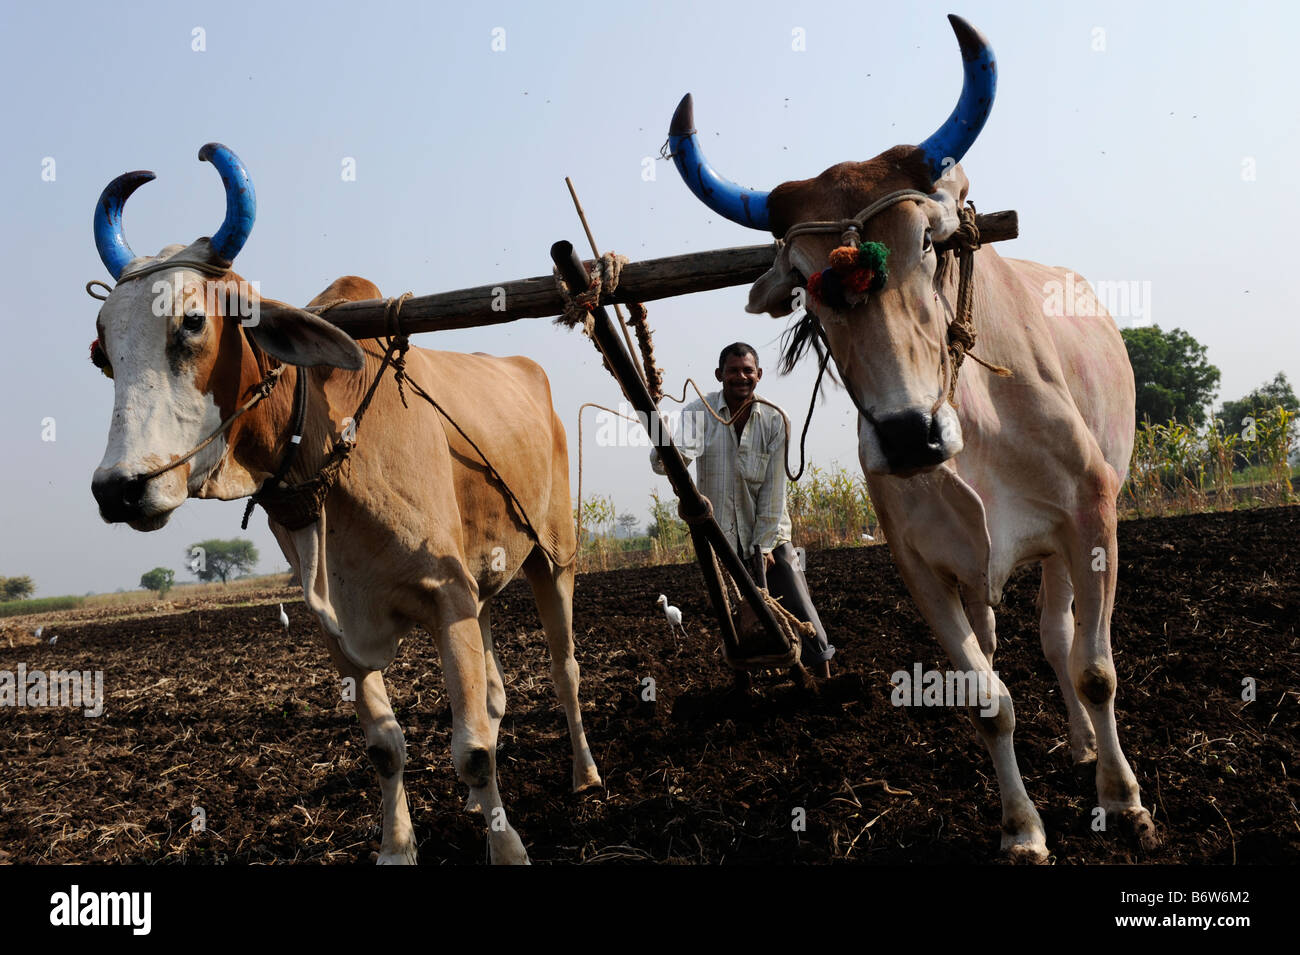 INDIA, M.P. Khargone , fair trade and organic cotton farming, farmer plow cotton field with two ox, wooden yoke Stock Photo